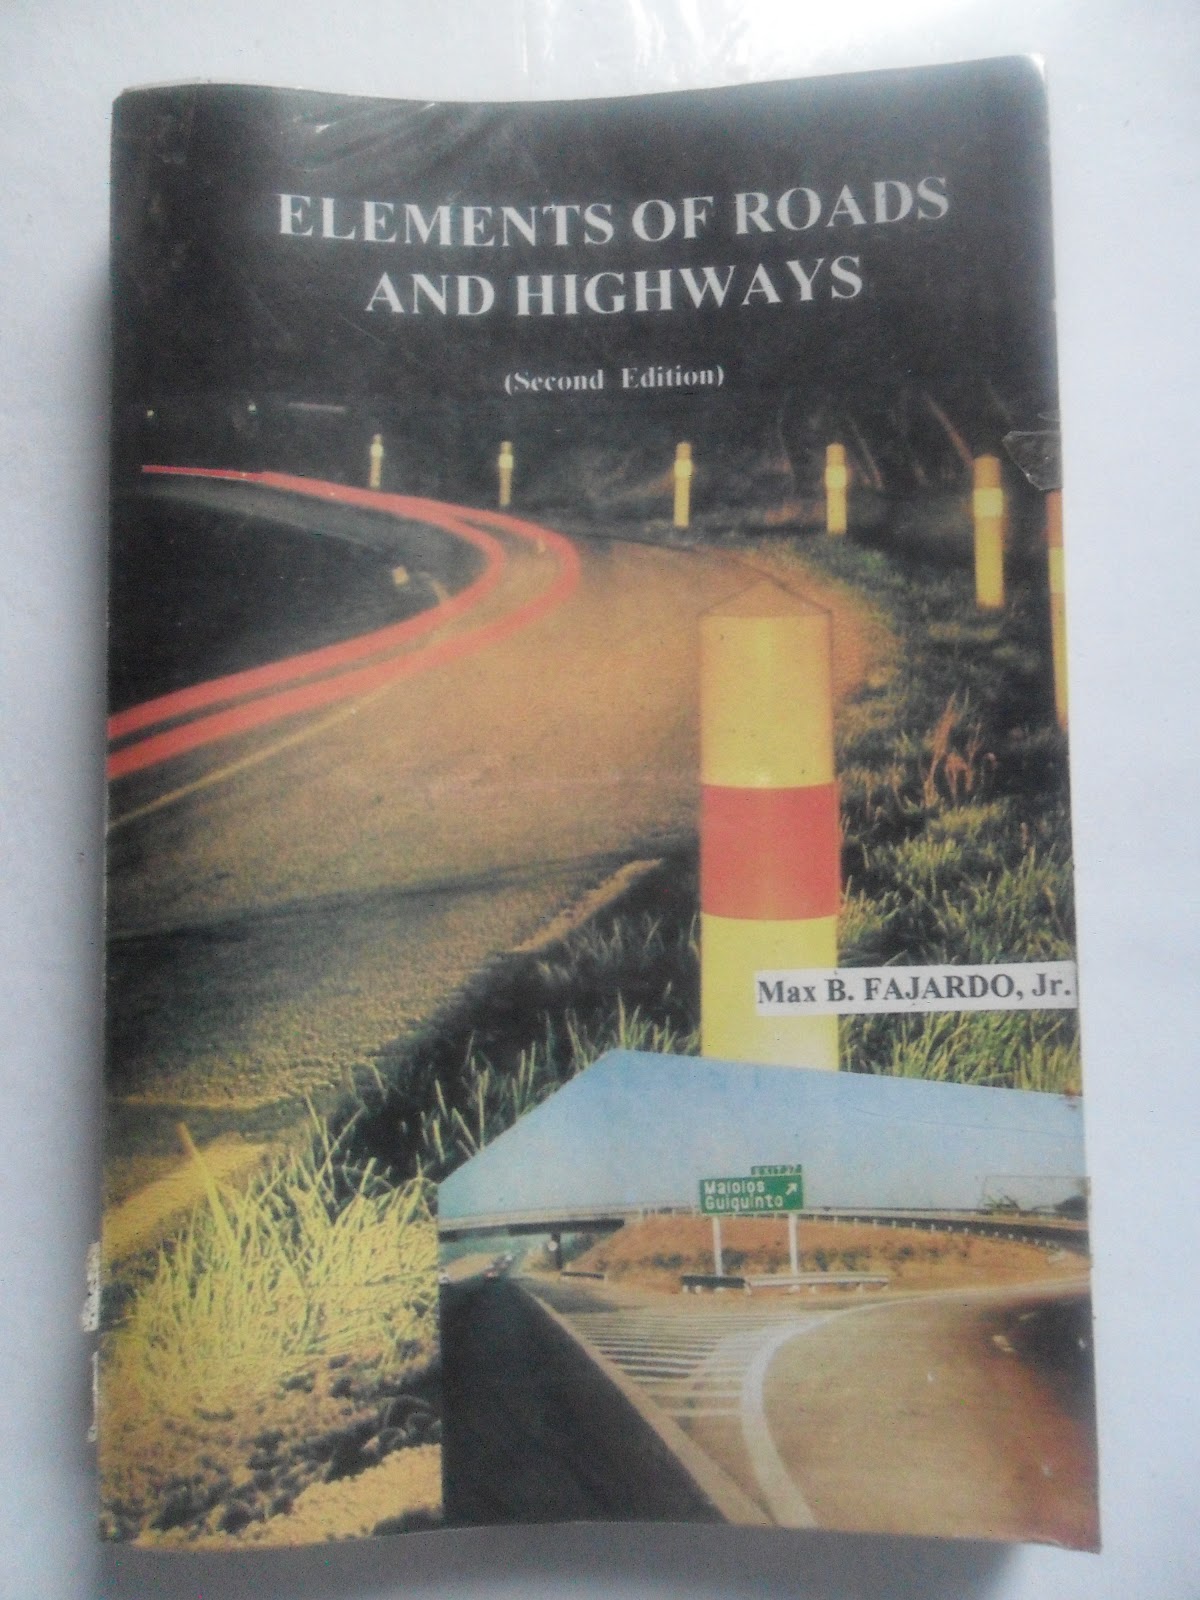 Principles Of Highway Engineering And Traffic Analysis 5th Edition Pdf Free Download